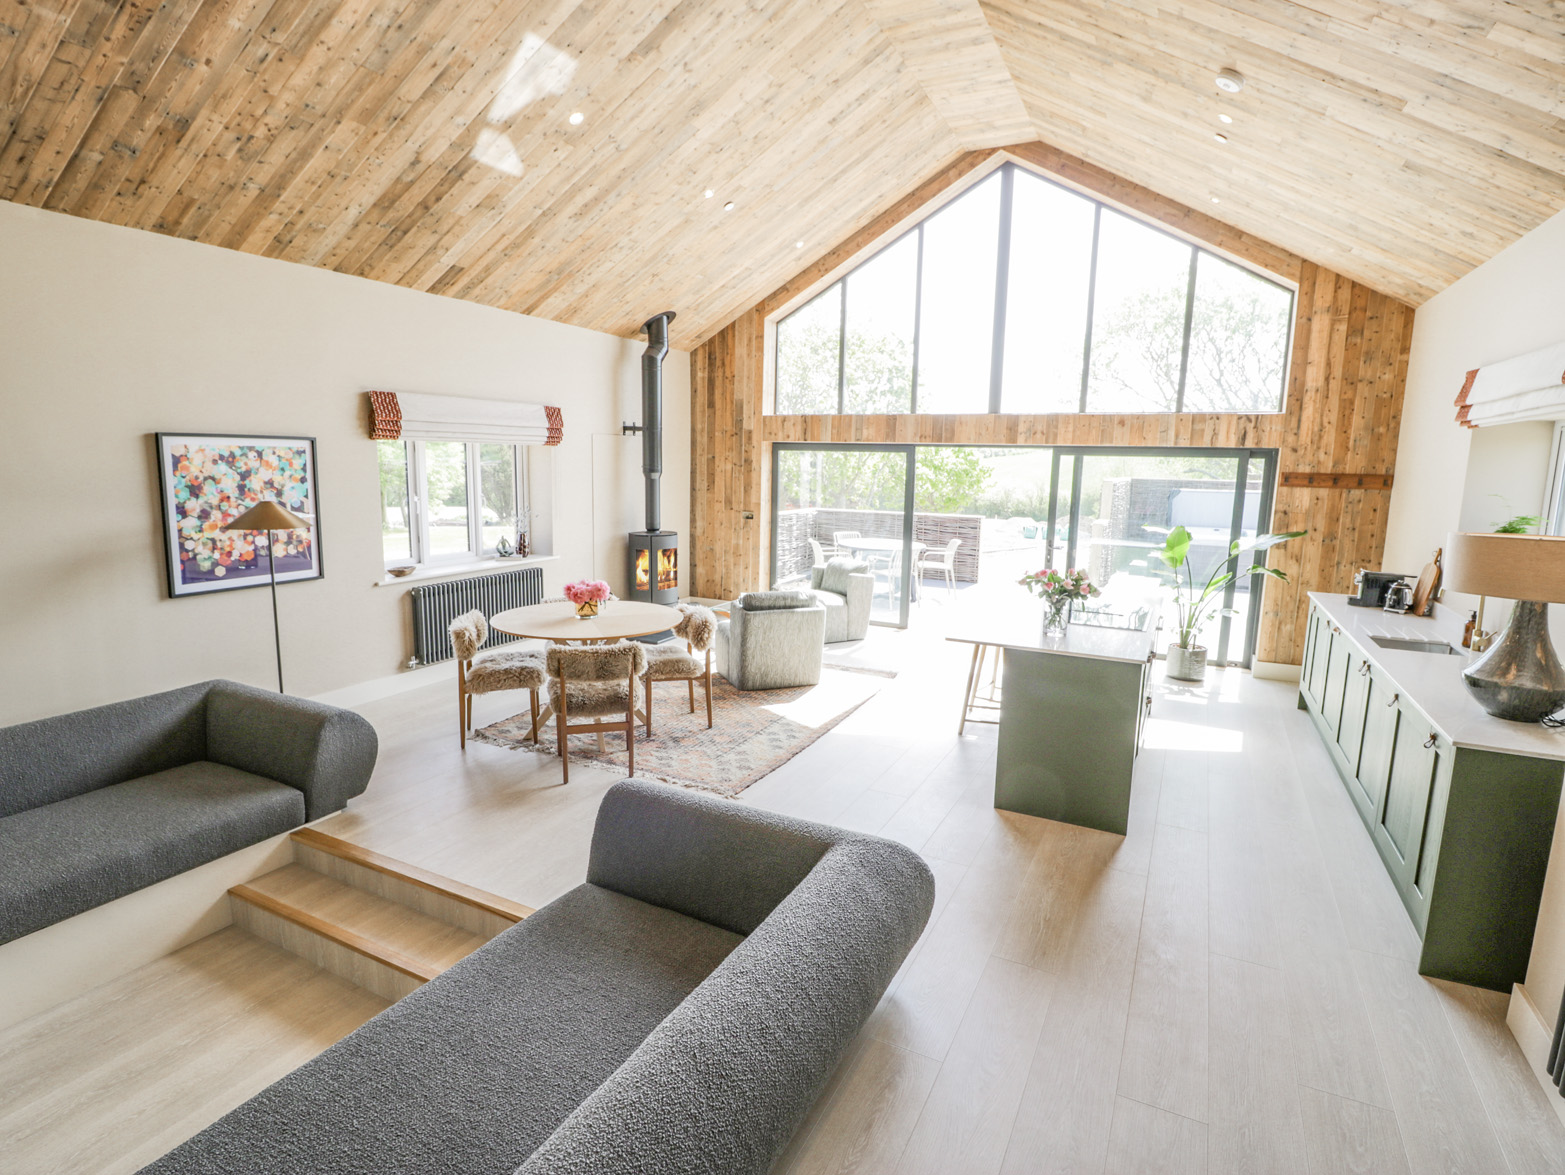 The Barn is in Llanfechell, Anglesey, North Wales, Near Snowdonia National Park, 1 bed, stylish home